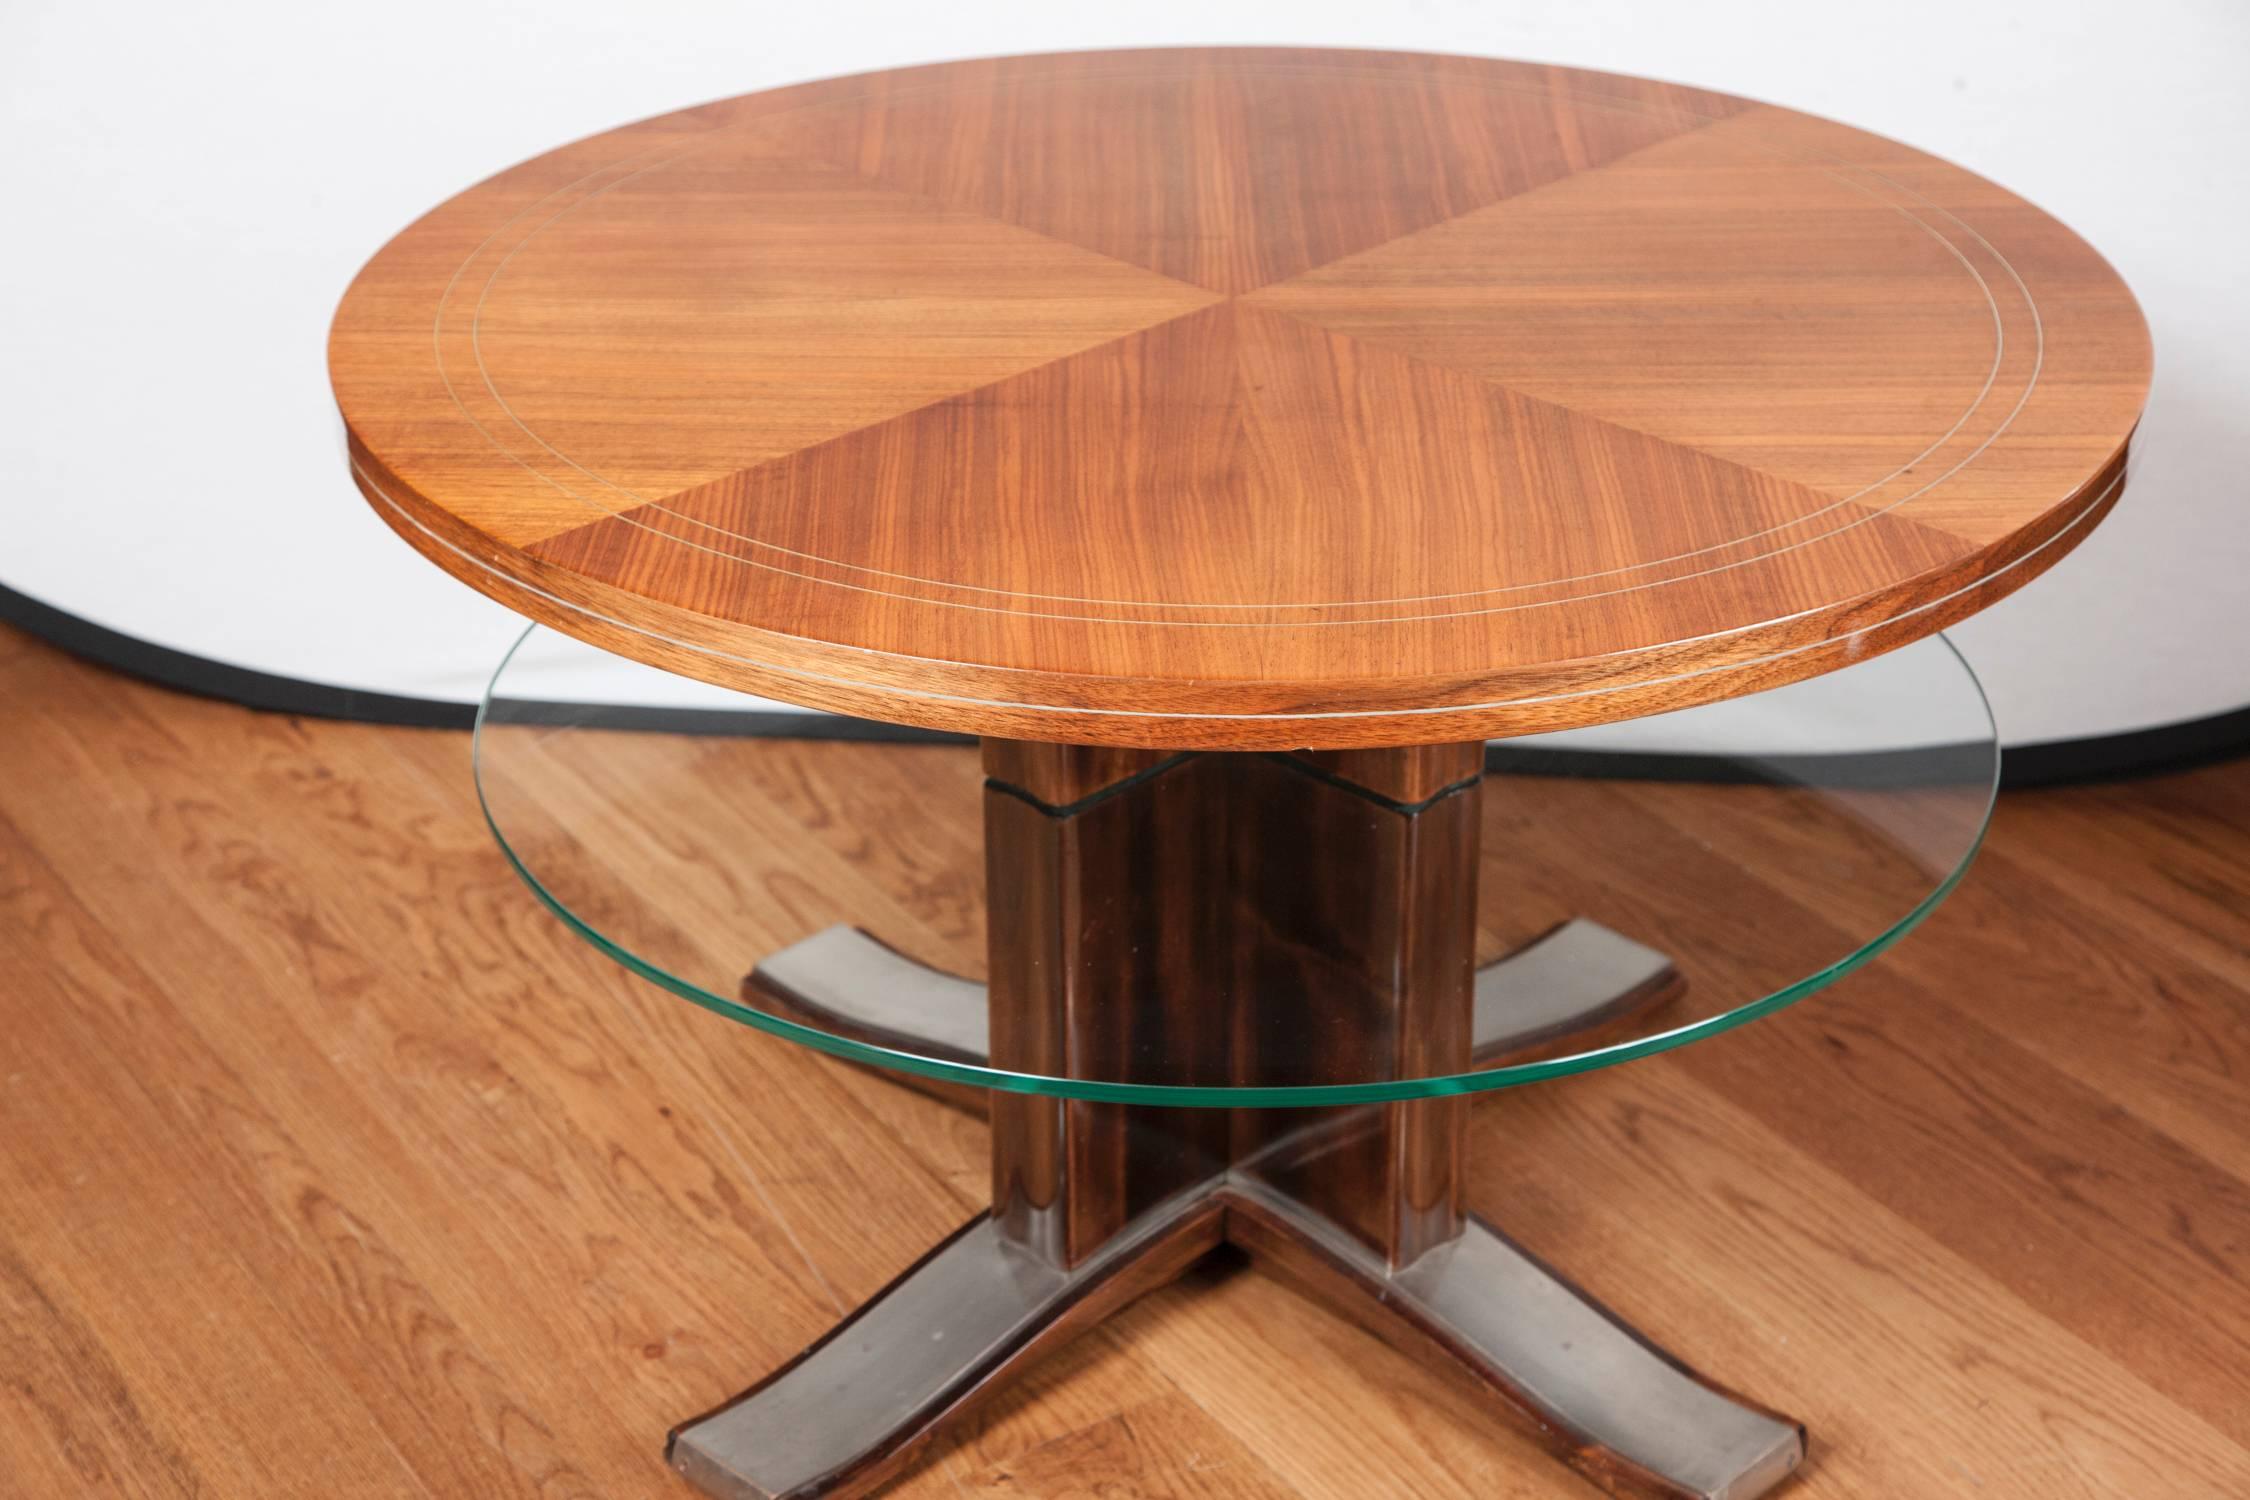 French Art Deco low round table, plateau in a veneered mahogany plateau with brass inlay, a glass shelf below finishing on a sleek mahogany base with steel splayed feet.
Attibuted to De Coene 